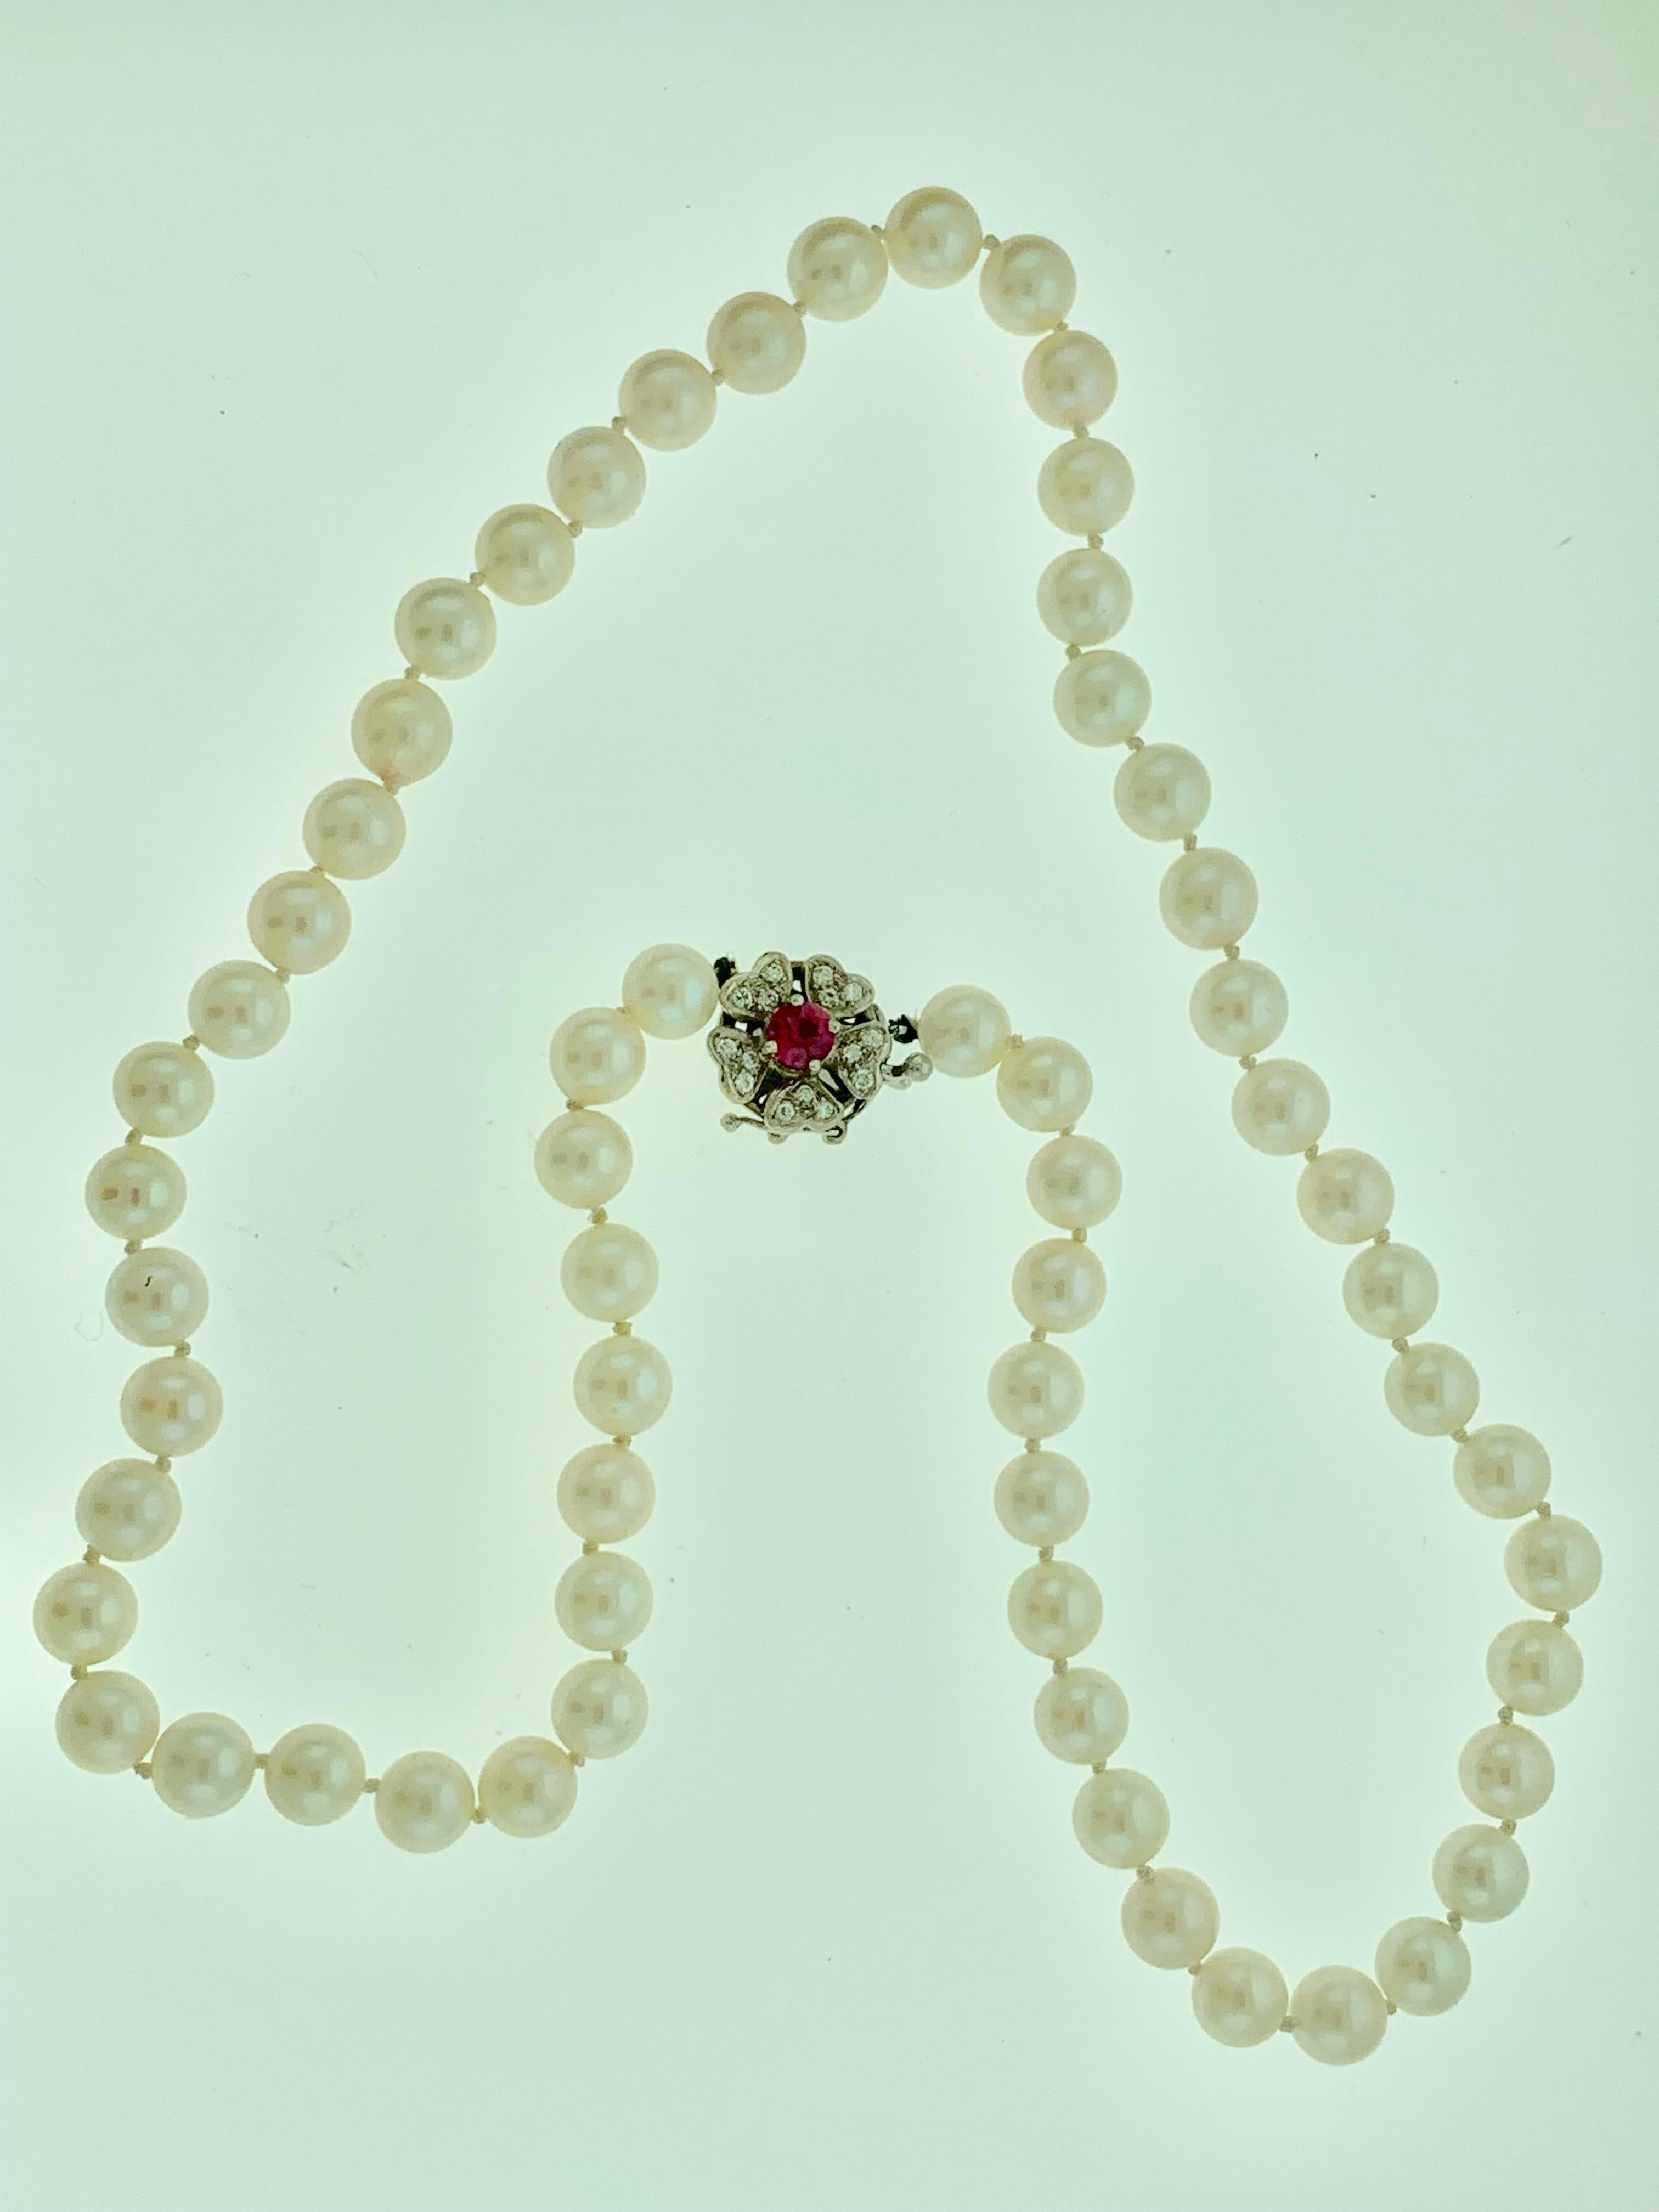 Vintage 14 Karat White Gold Pearl Strand Necklace with Diamond and Ruby Clasp 2